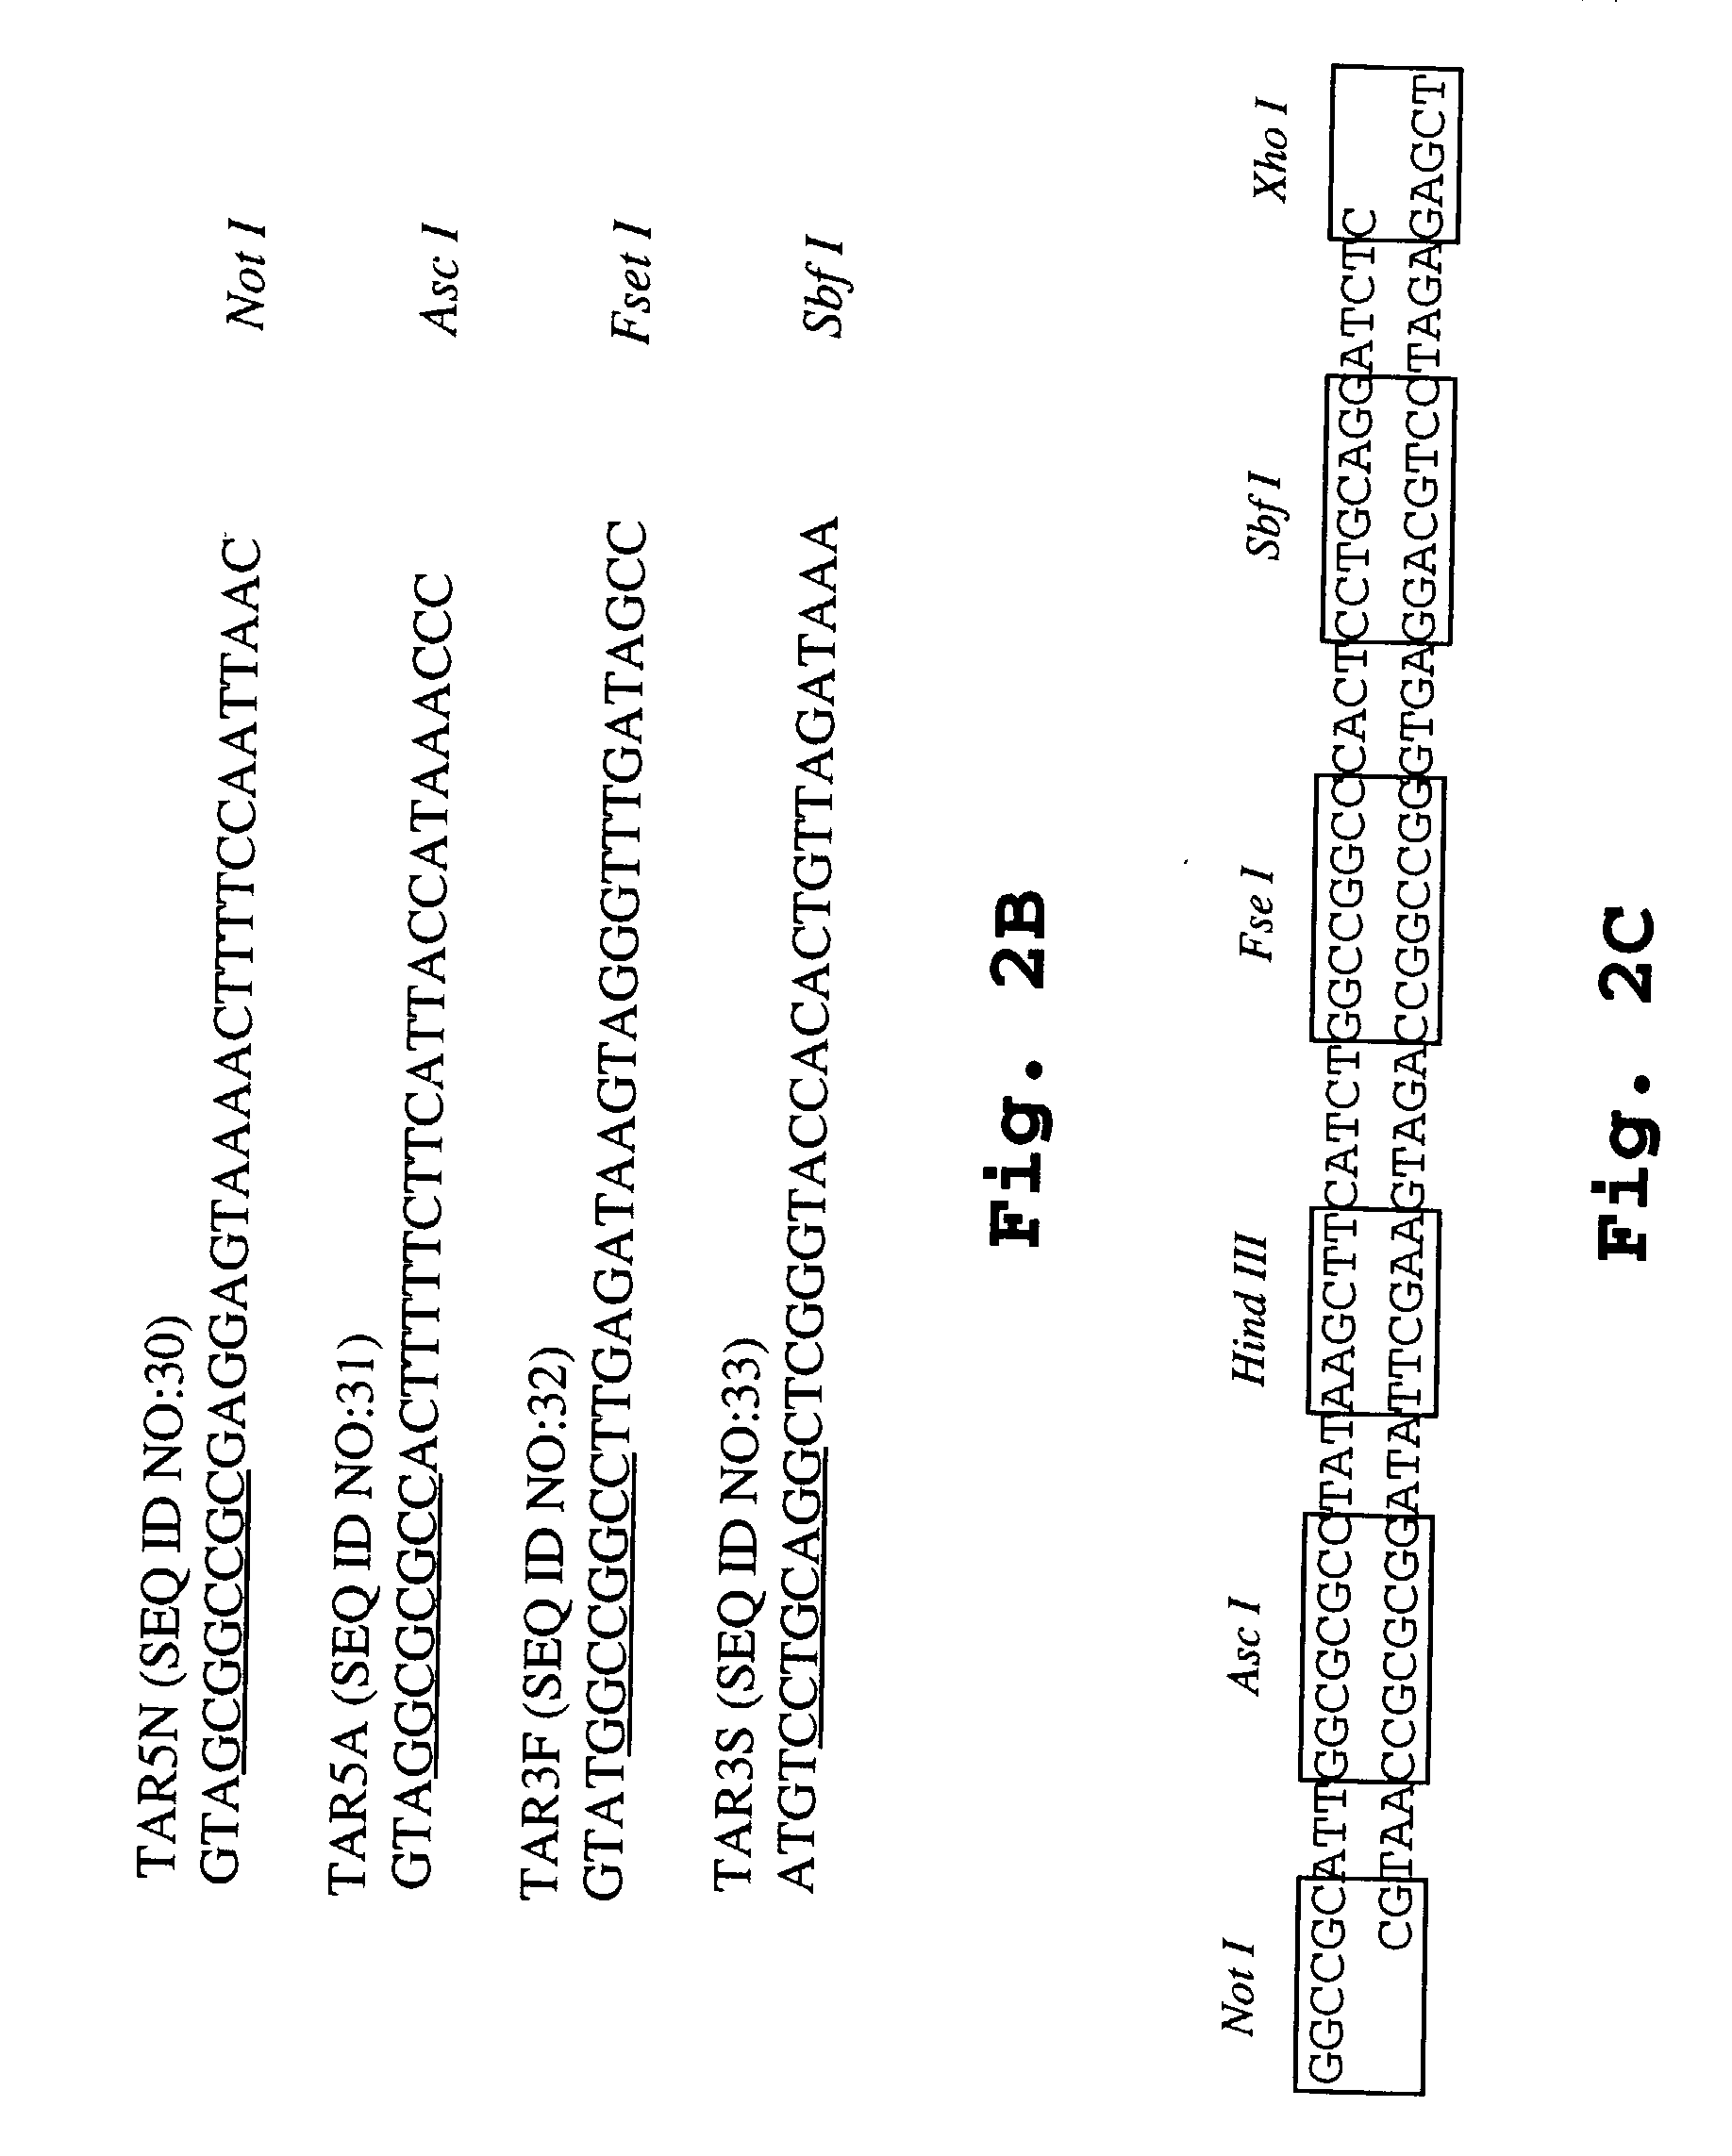 Methods of screening for introduction of DNA into a target cell